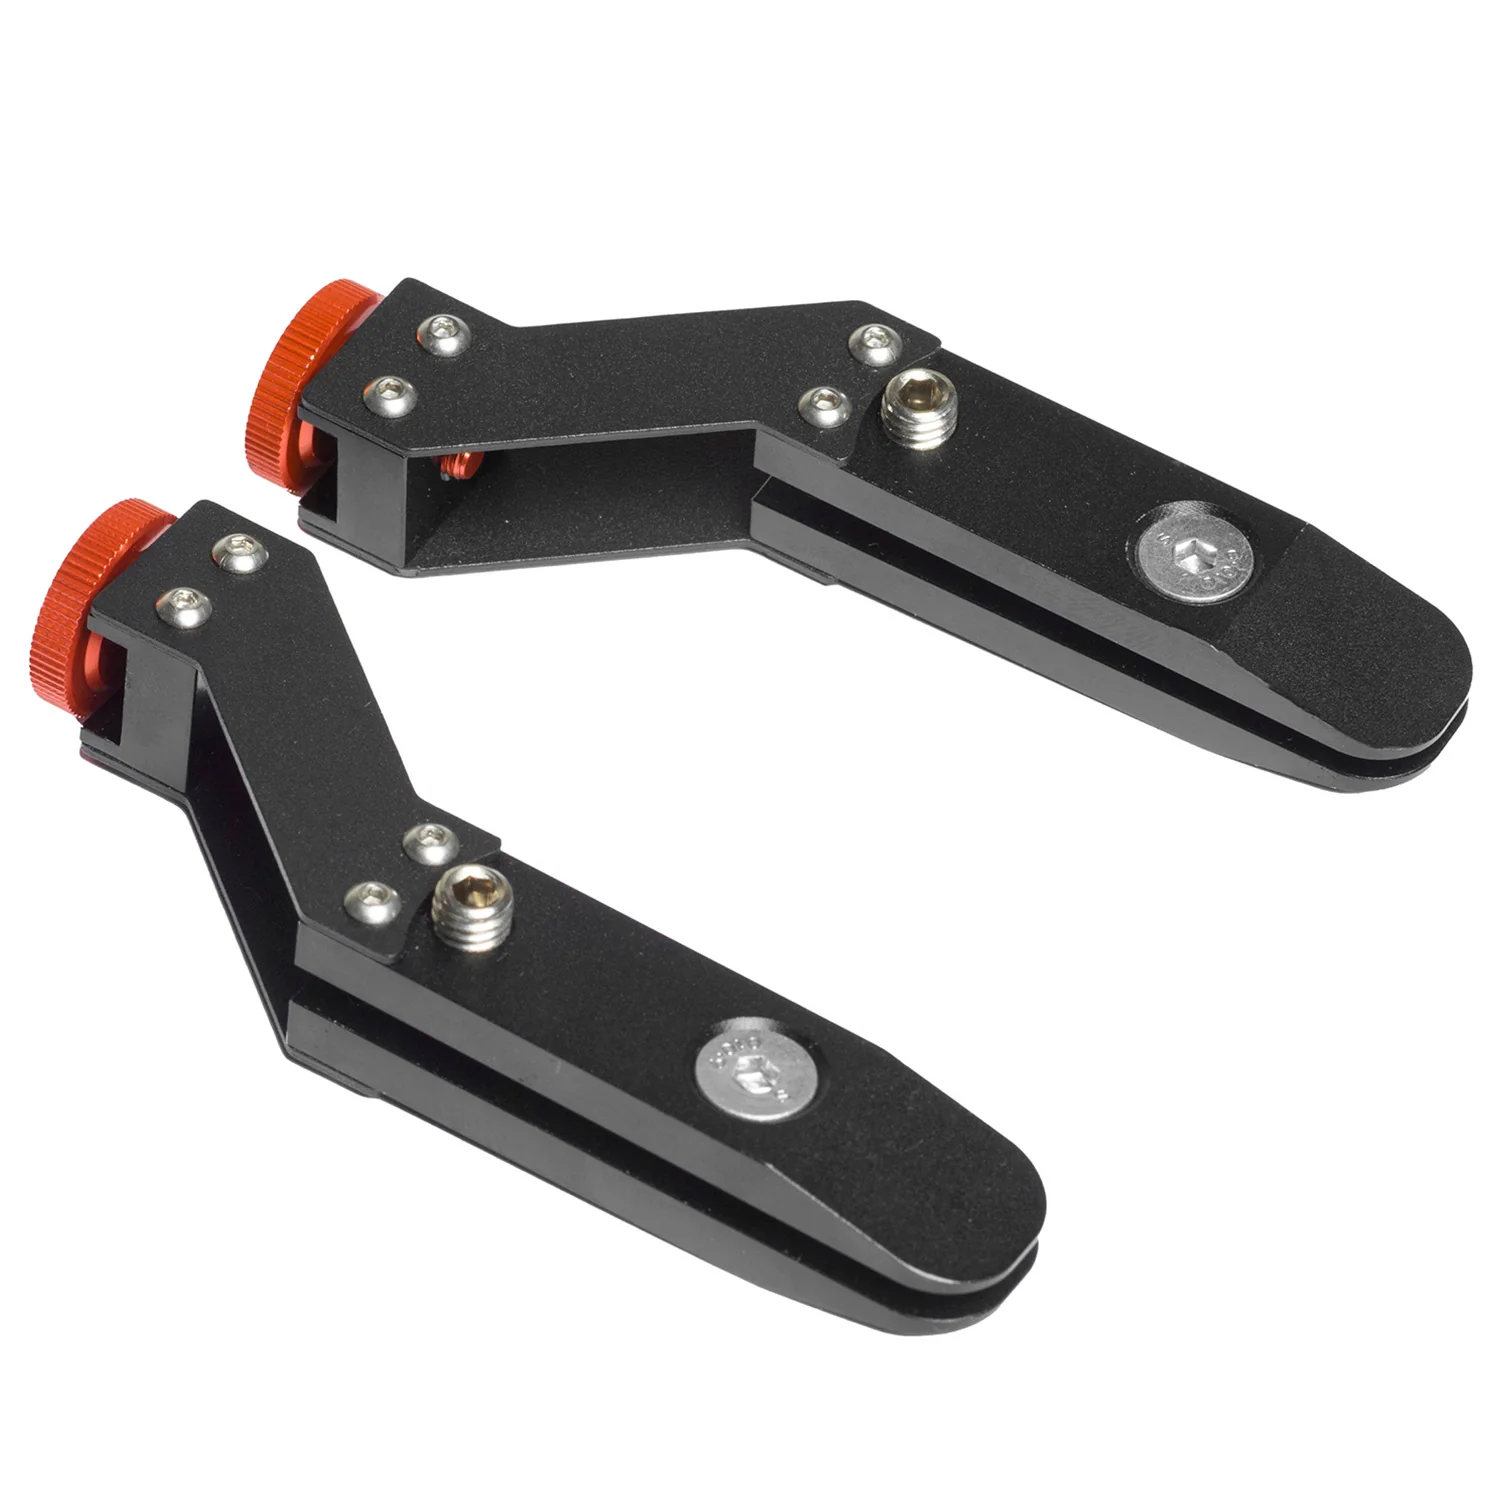 Universal Angled Clamps for Hapstone R2 (Set of 2) Questions & Answers